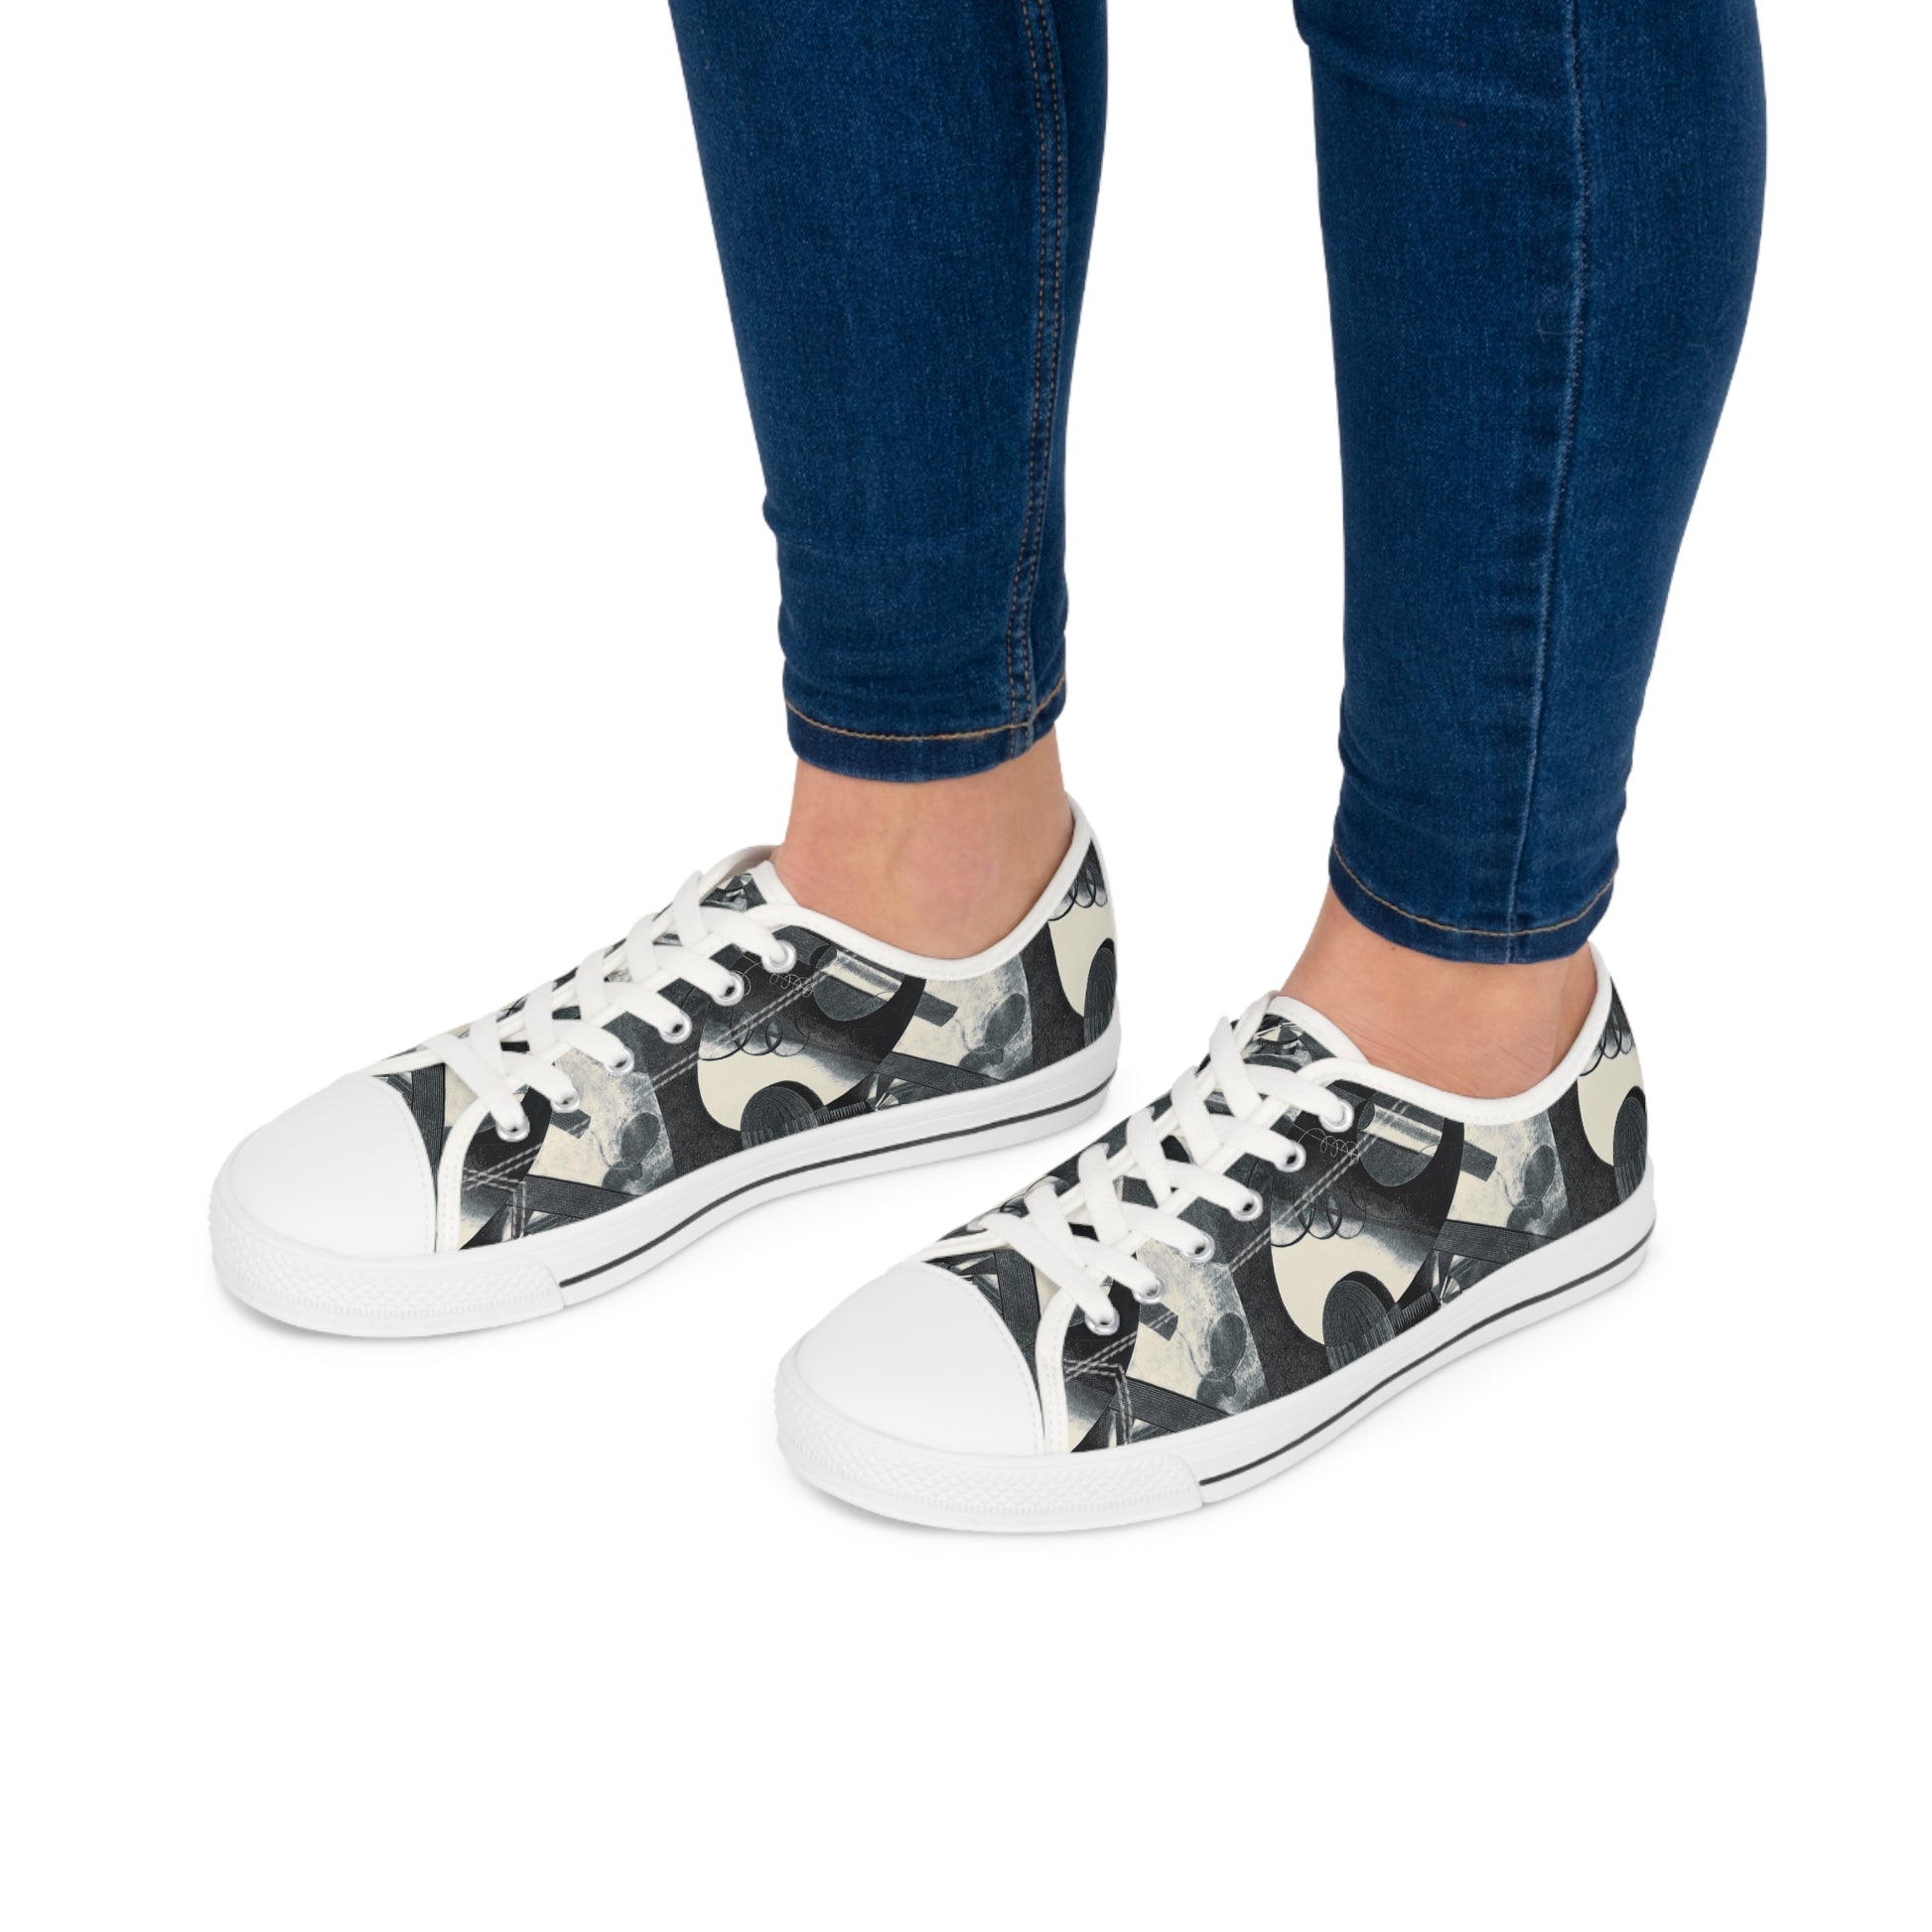 KAROL HILLER - HELIOGRAPHIC COMPOSITION (XXIX) - LOW TOP ART SNEAKERS FOR HER